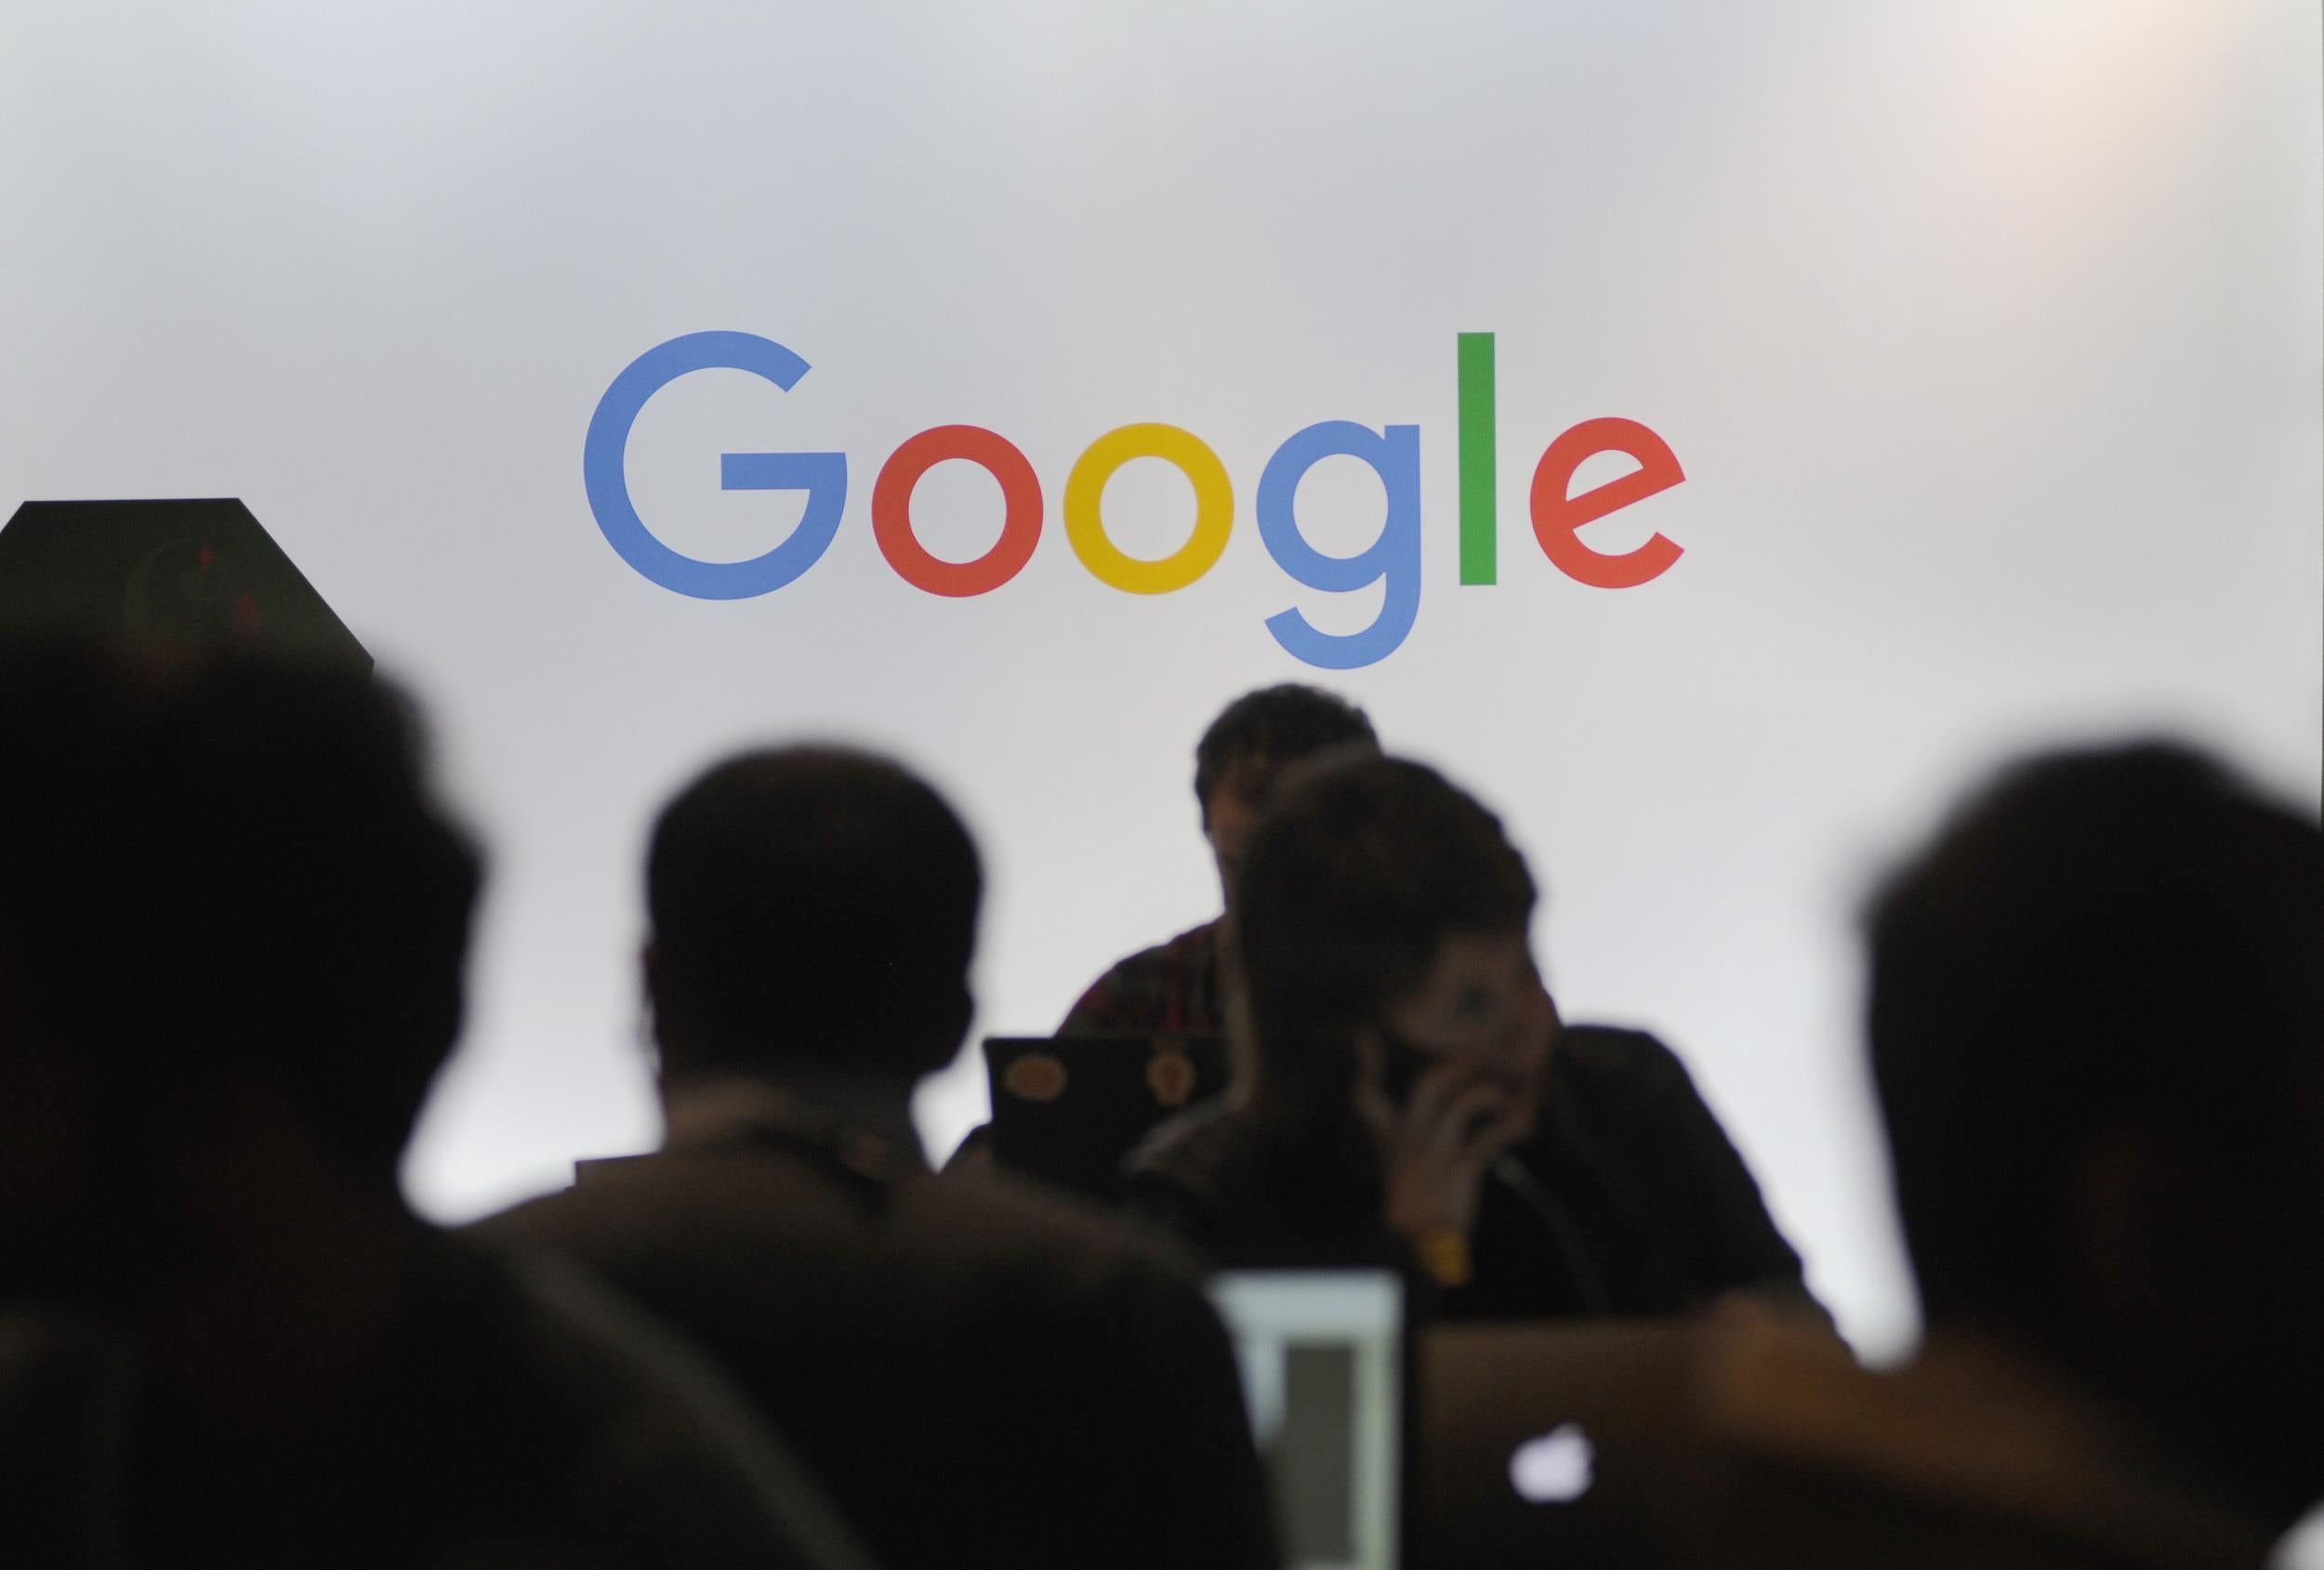 Google's top trending topics provide an insight into what was on the mind of the nation in 2015